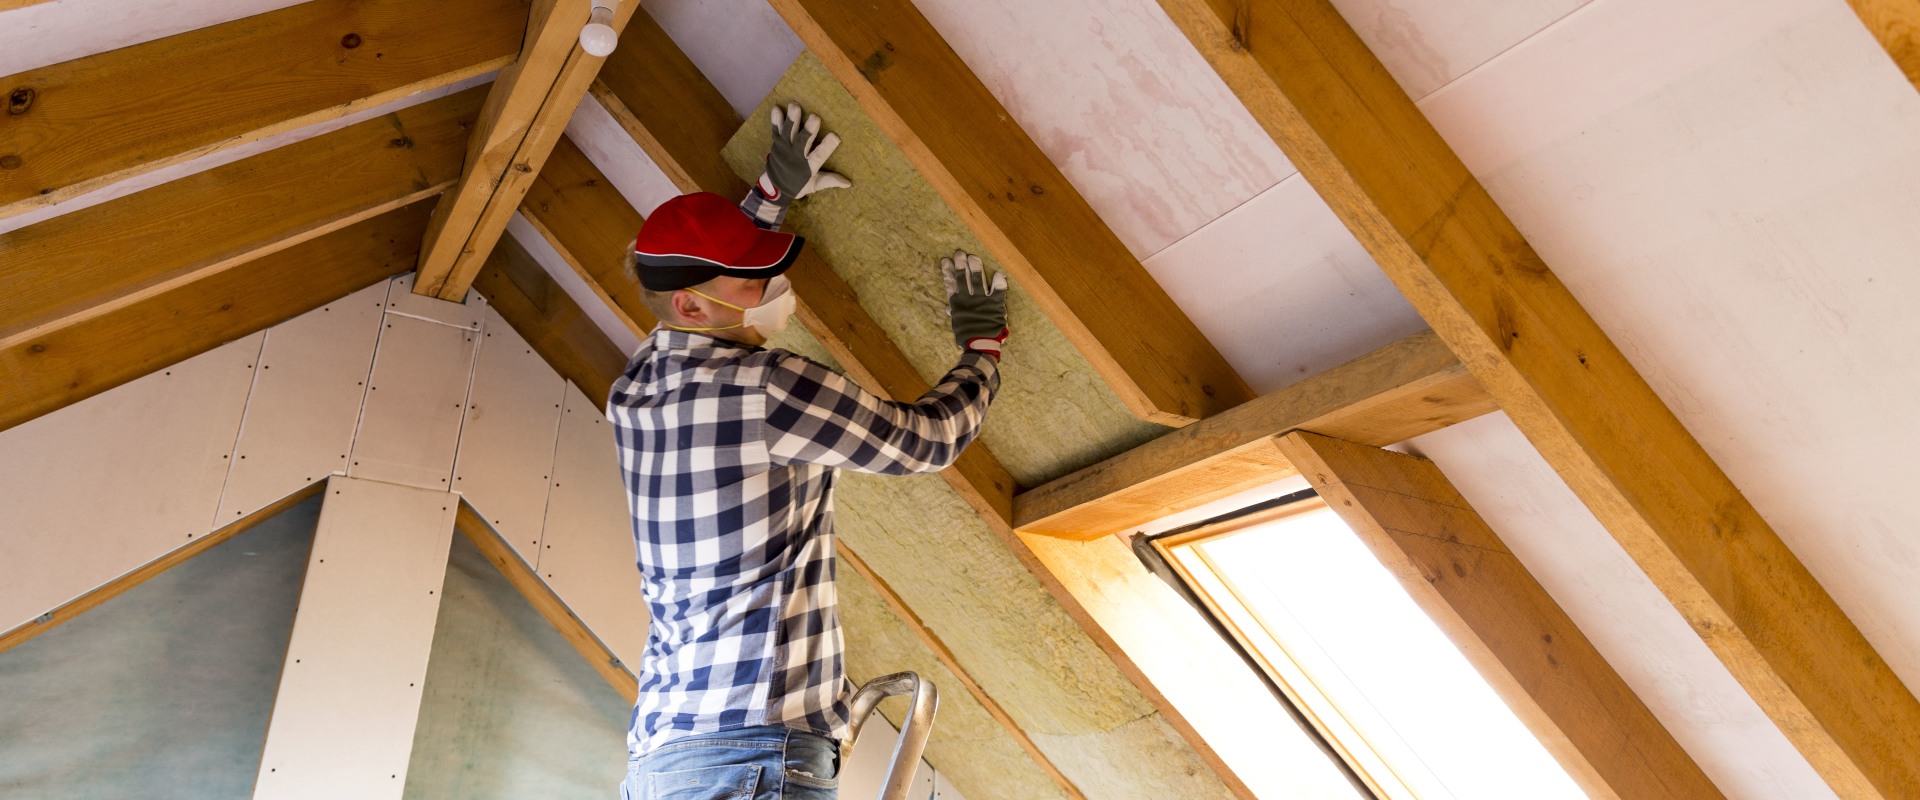 Top Attic Insulation Installation Services in Port St. Lucie